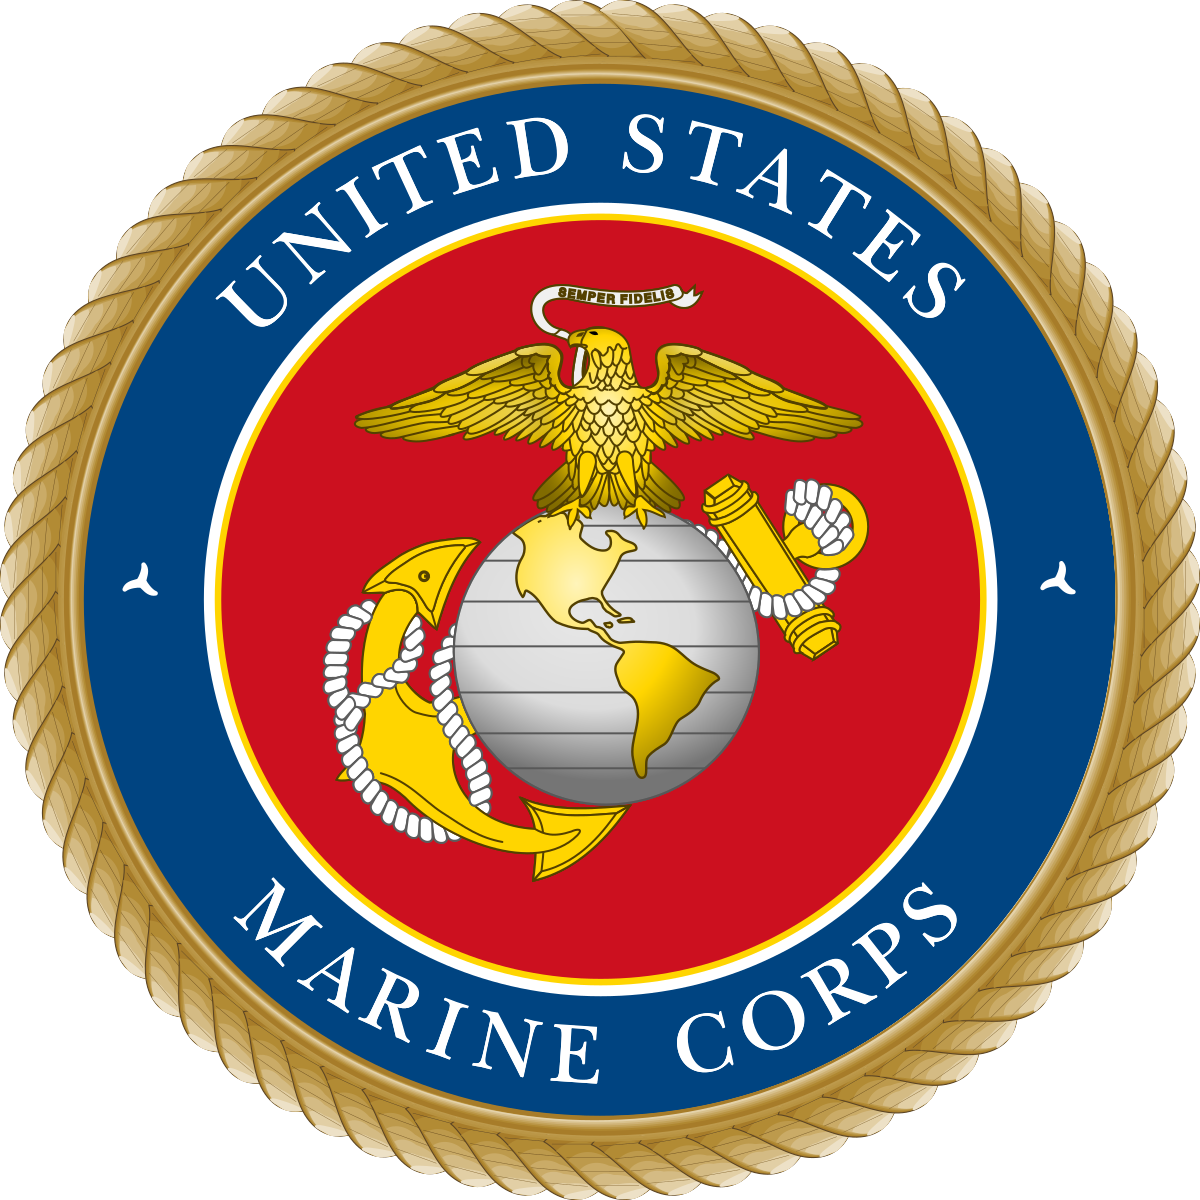 Emblem_of_the_United_States_Marine_Corps.svg.png